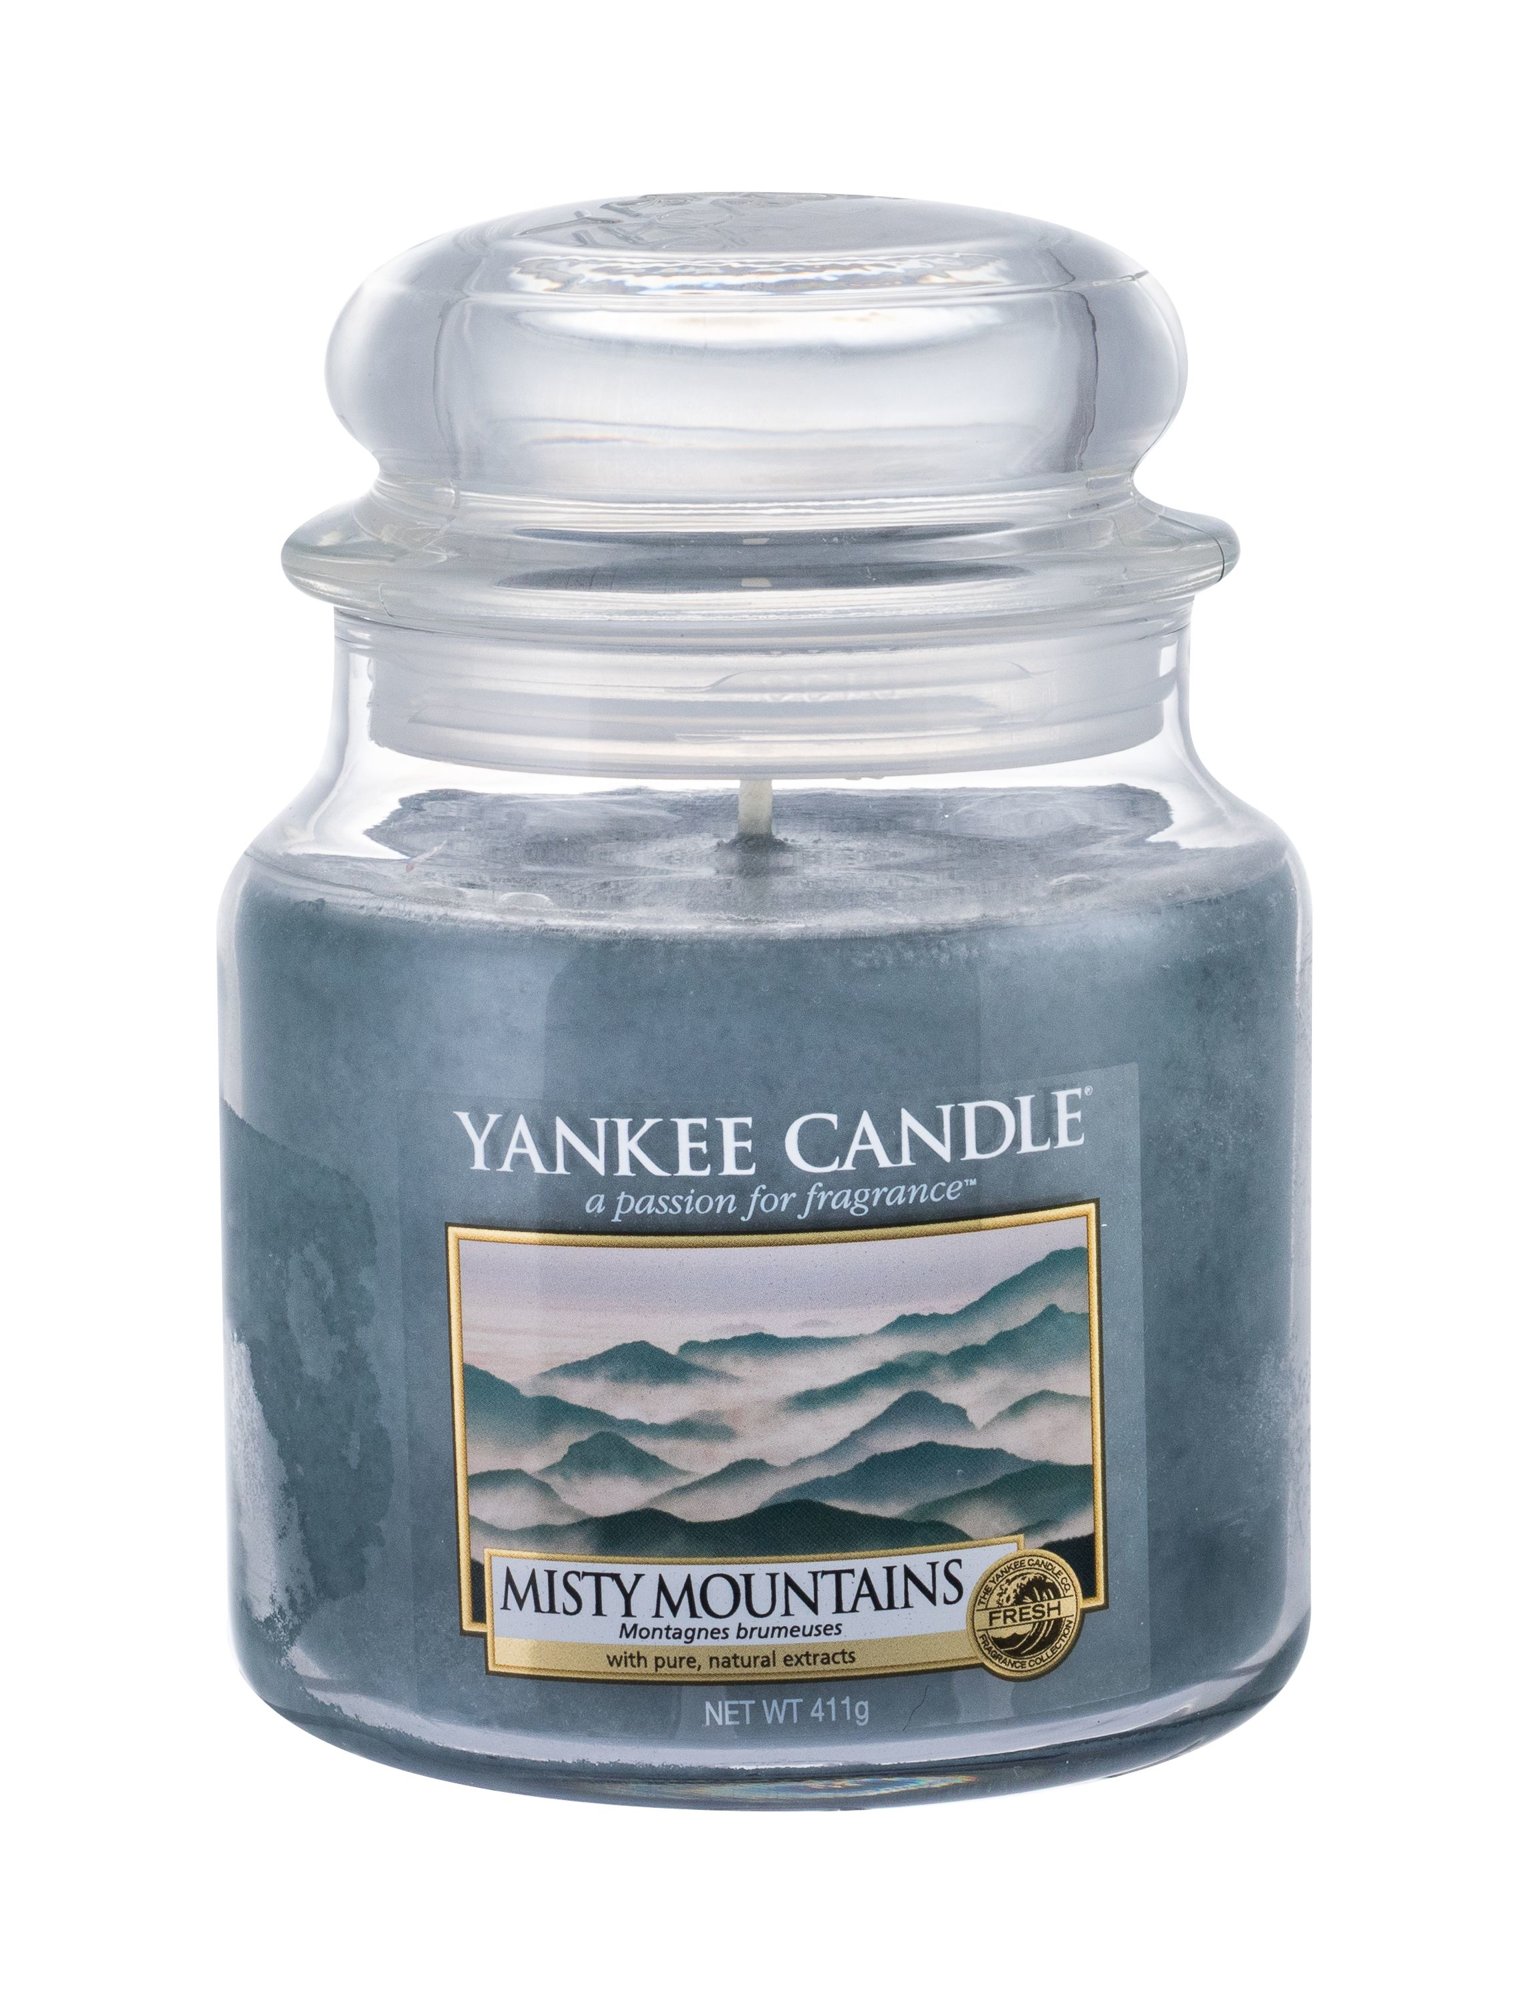 Yankee Candle Misty Mountains 411g Kvepalai Unisex Scented Candle